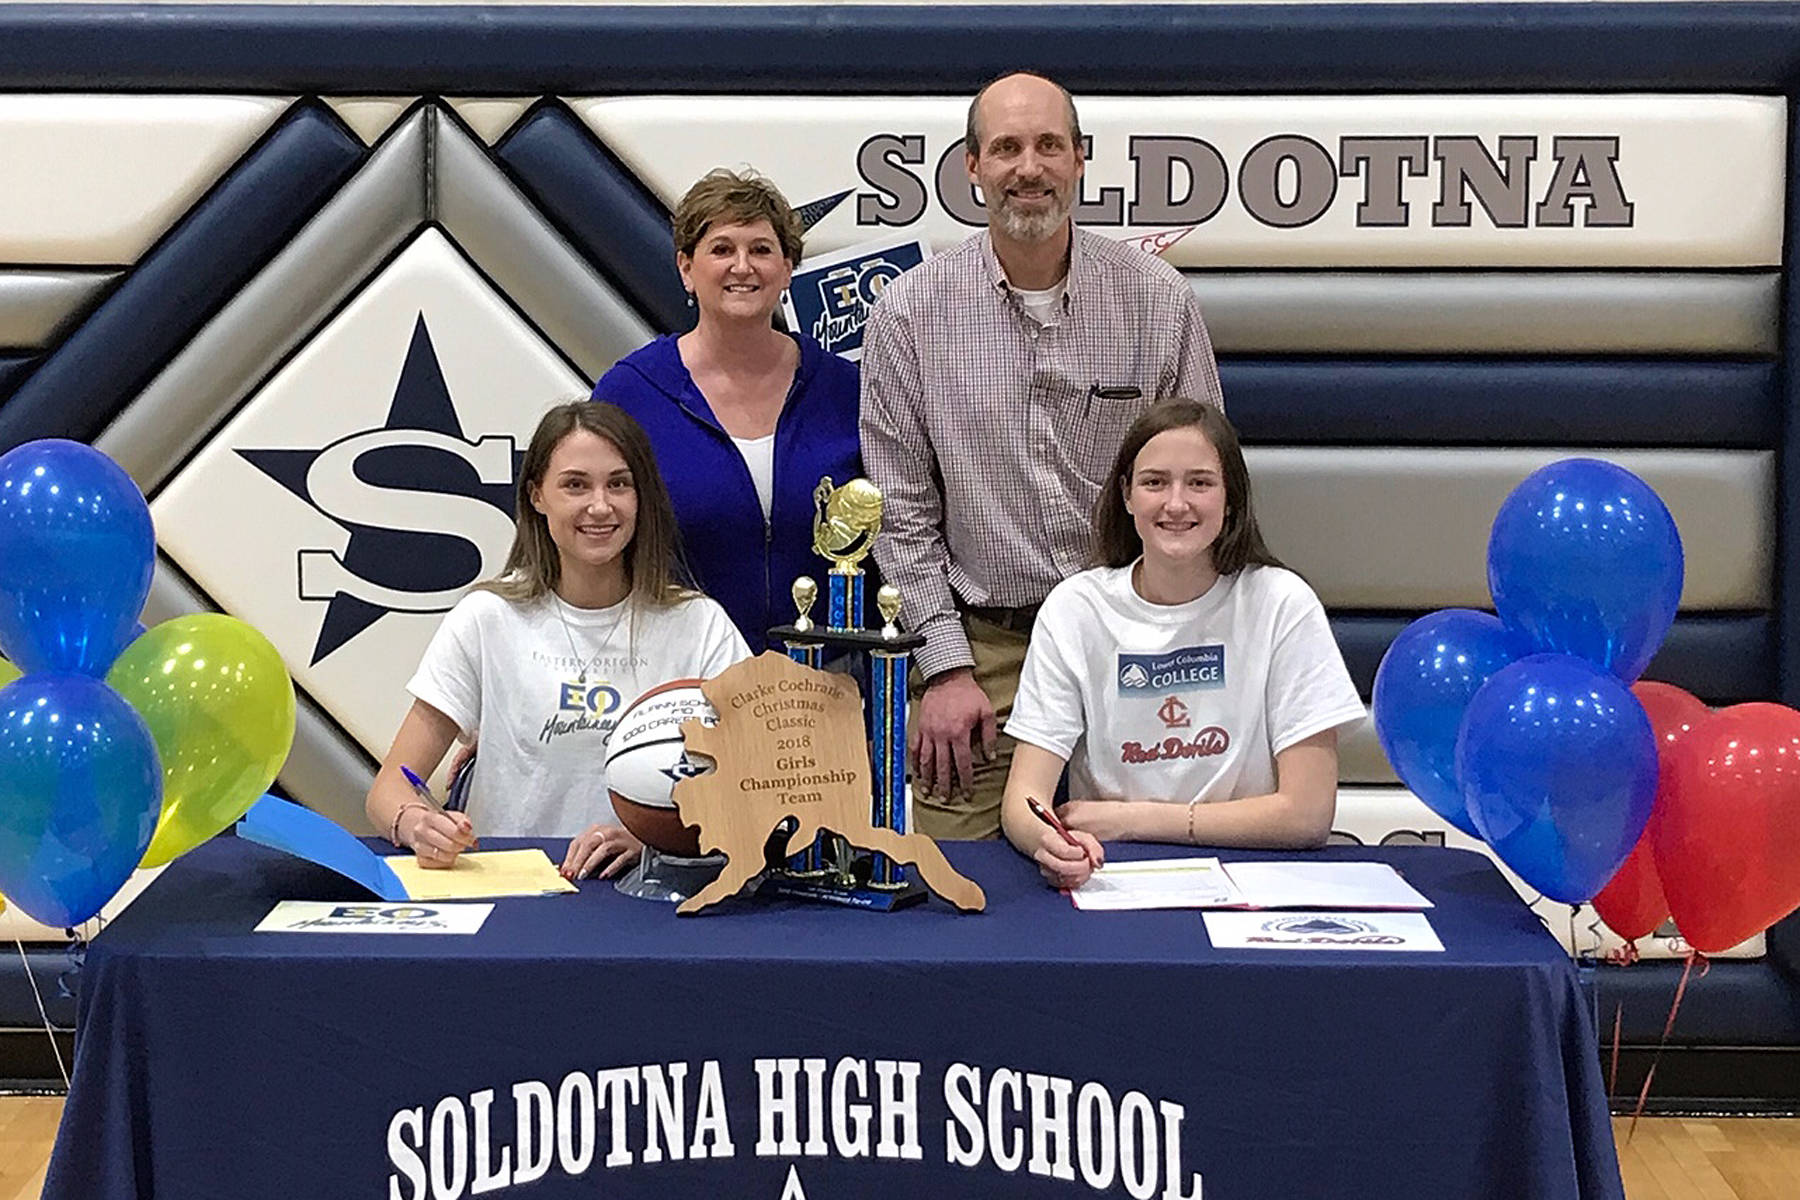 Soldotna seniors Aliann (bottom left) and Danica Schmidt (bottom right) sign their letters of intent to play college basketball Thursday at Soldotna High School, with parents, Margaret and Curtis Schmidt, by their side. (Photo provided by Kyle McFall)